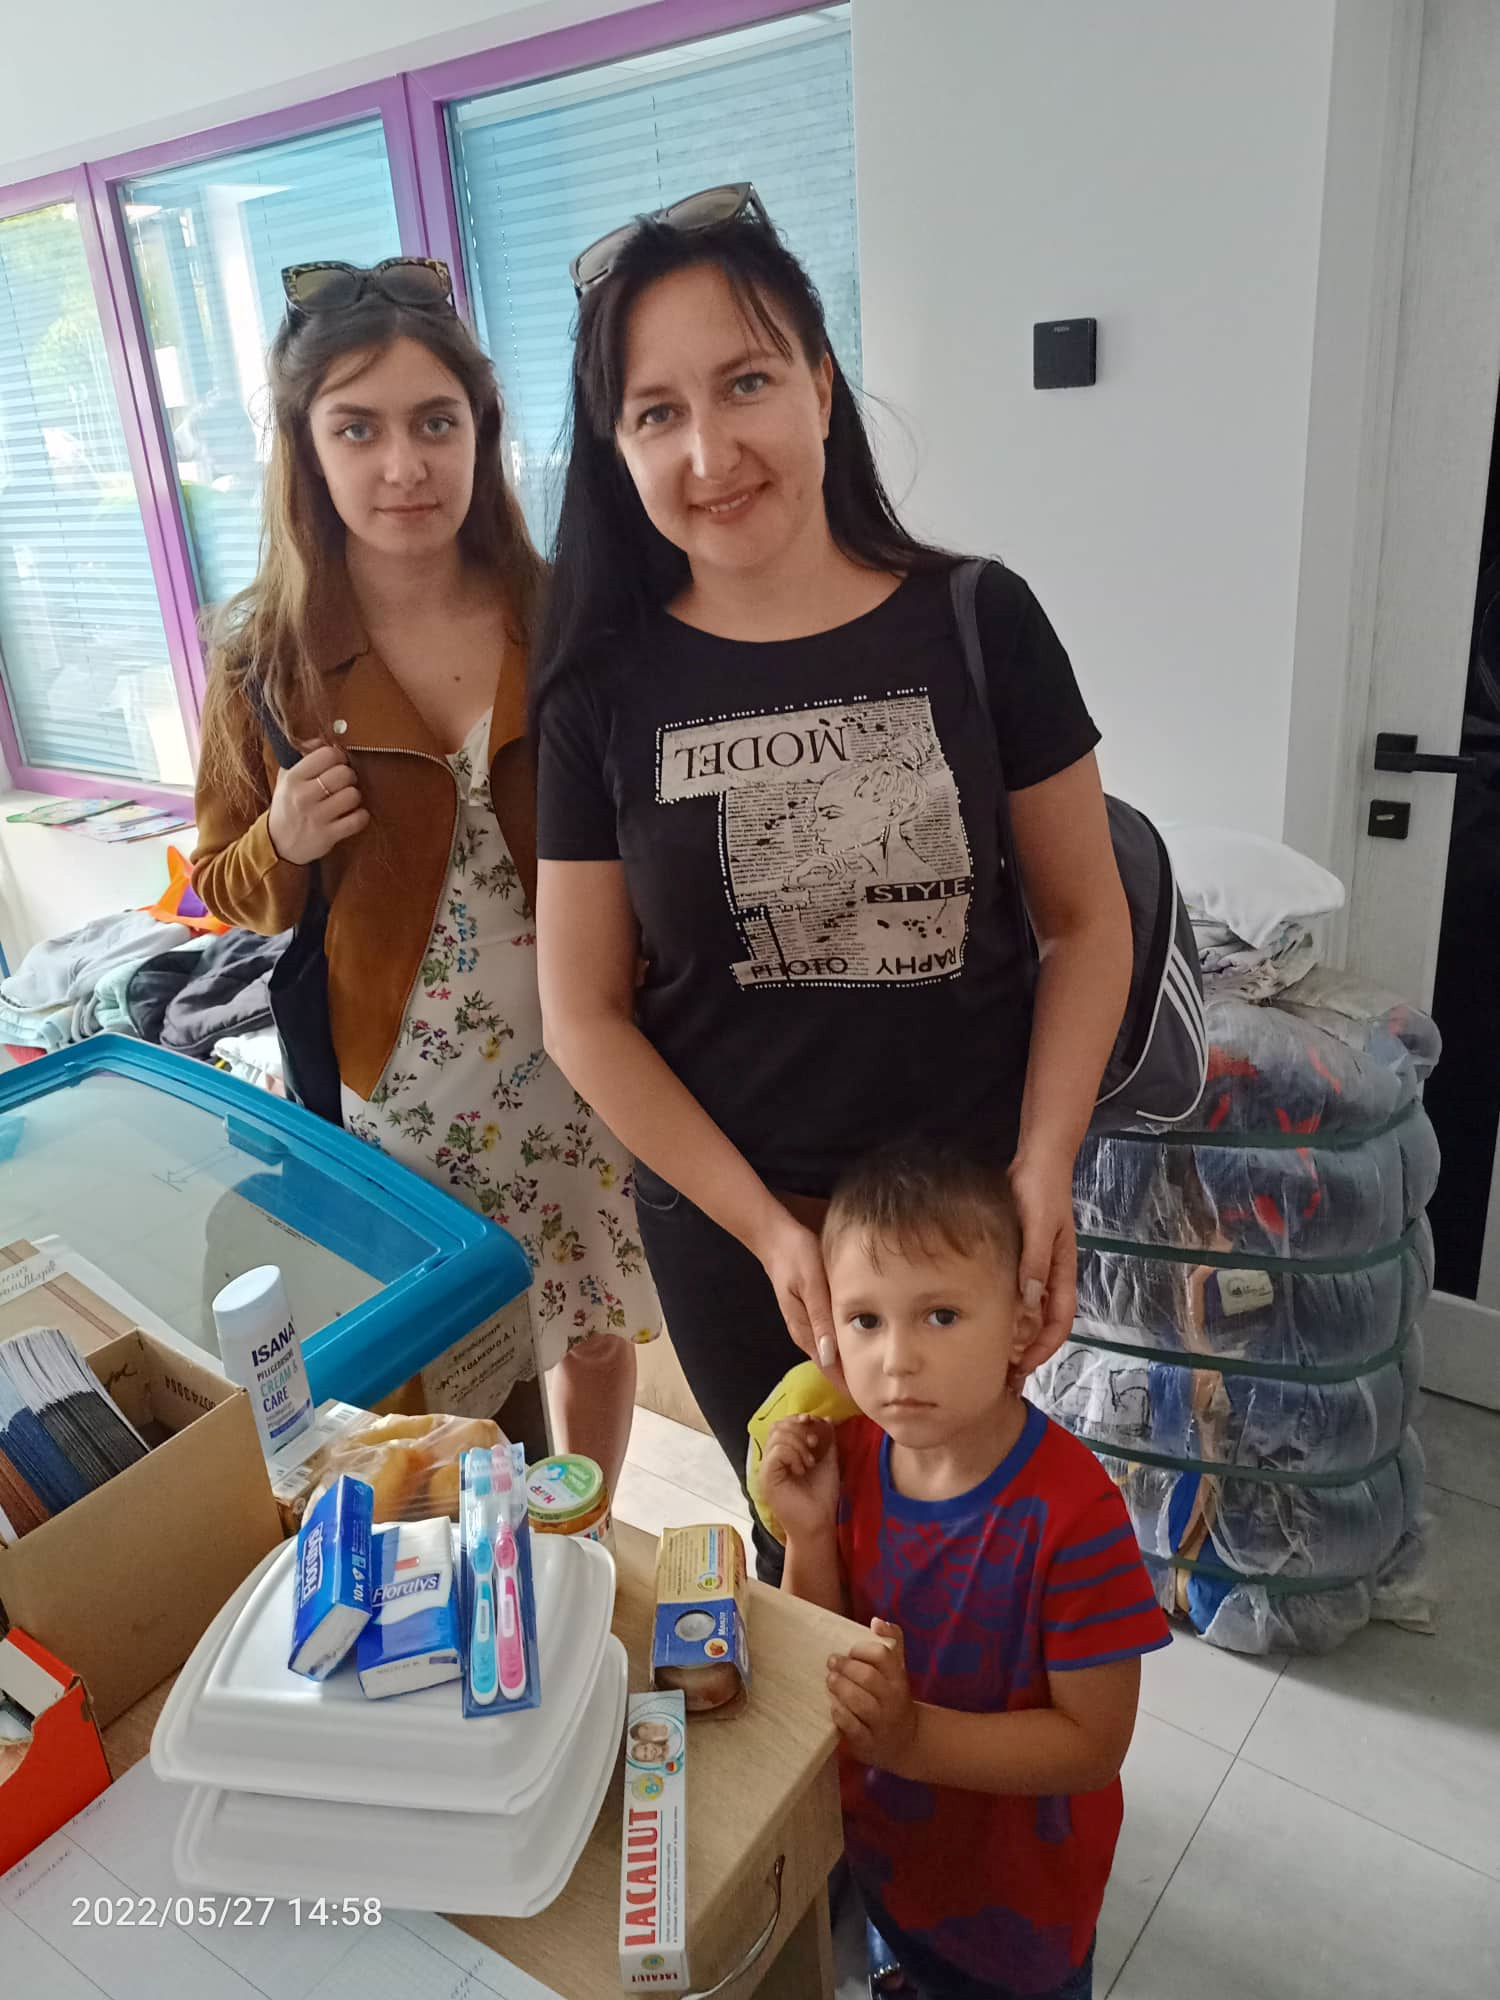 An internally displaced family receiving supplies in Lviv